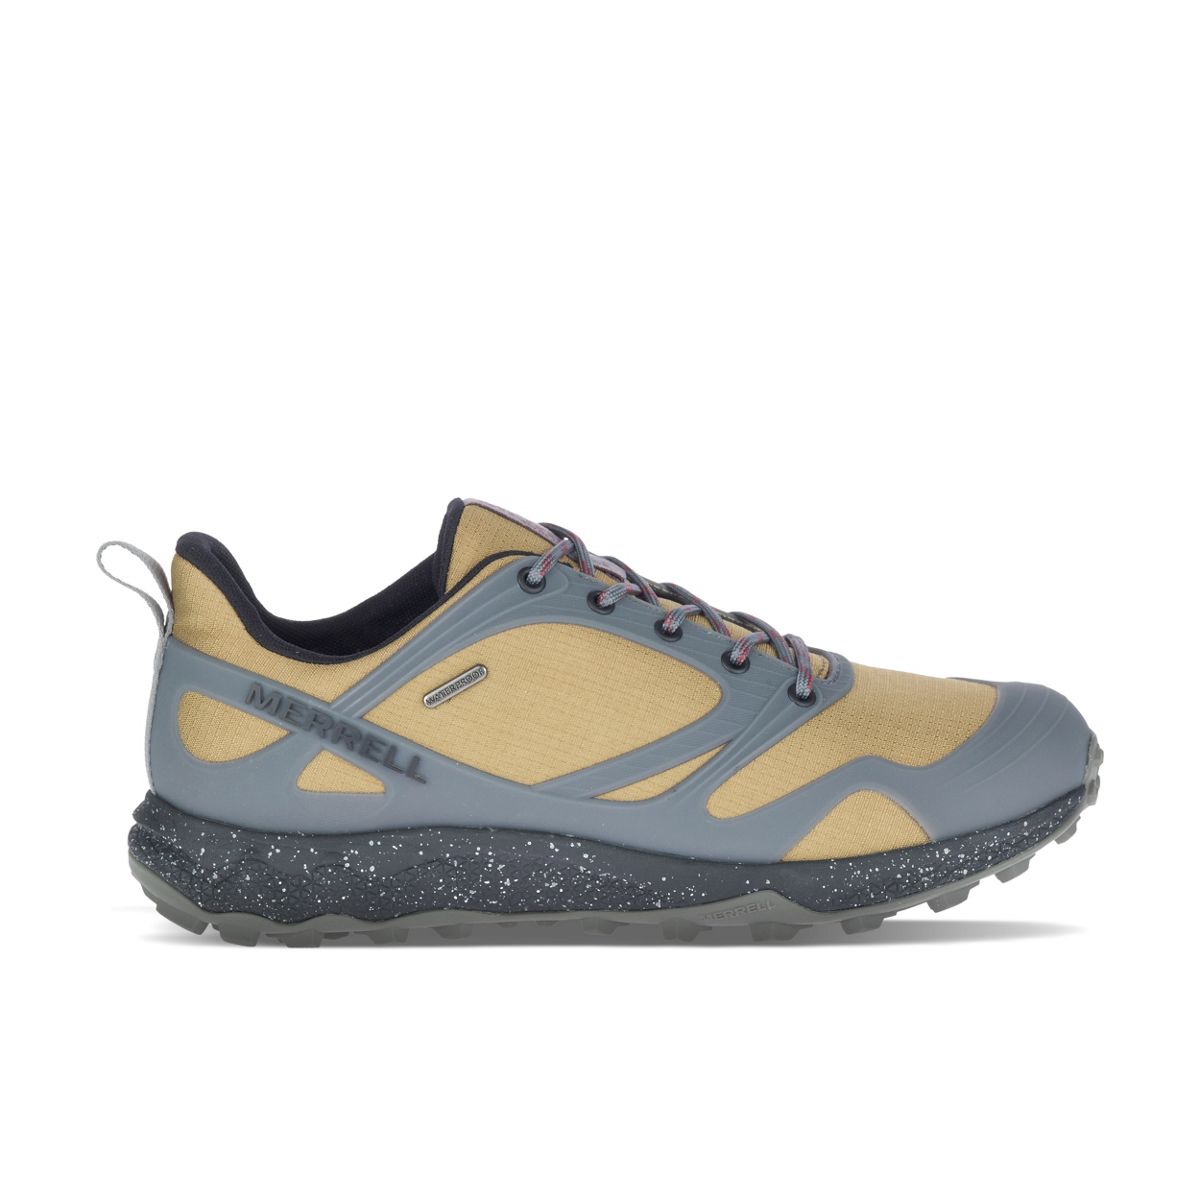 merrell water resistant shoes